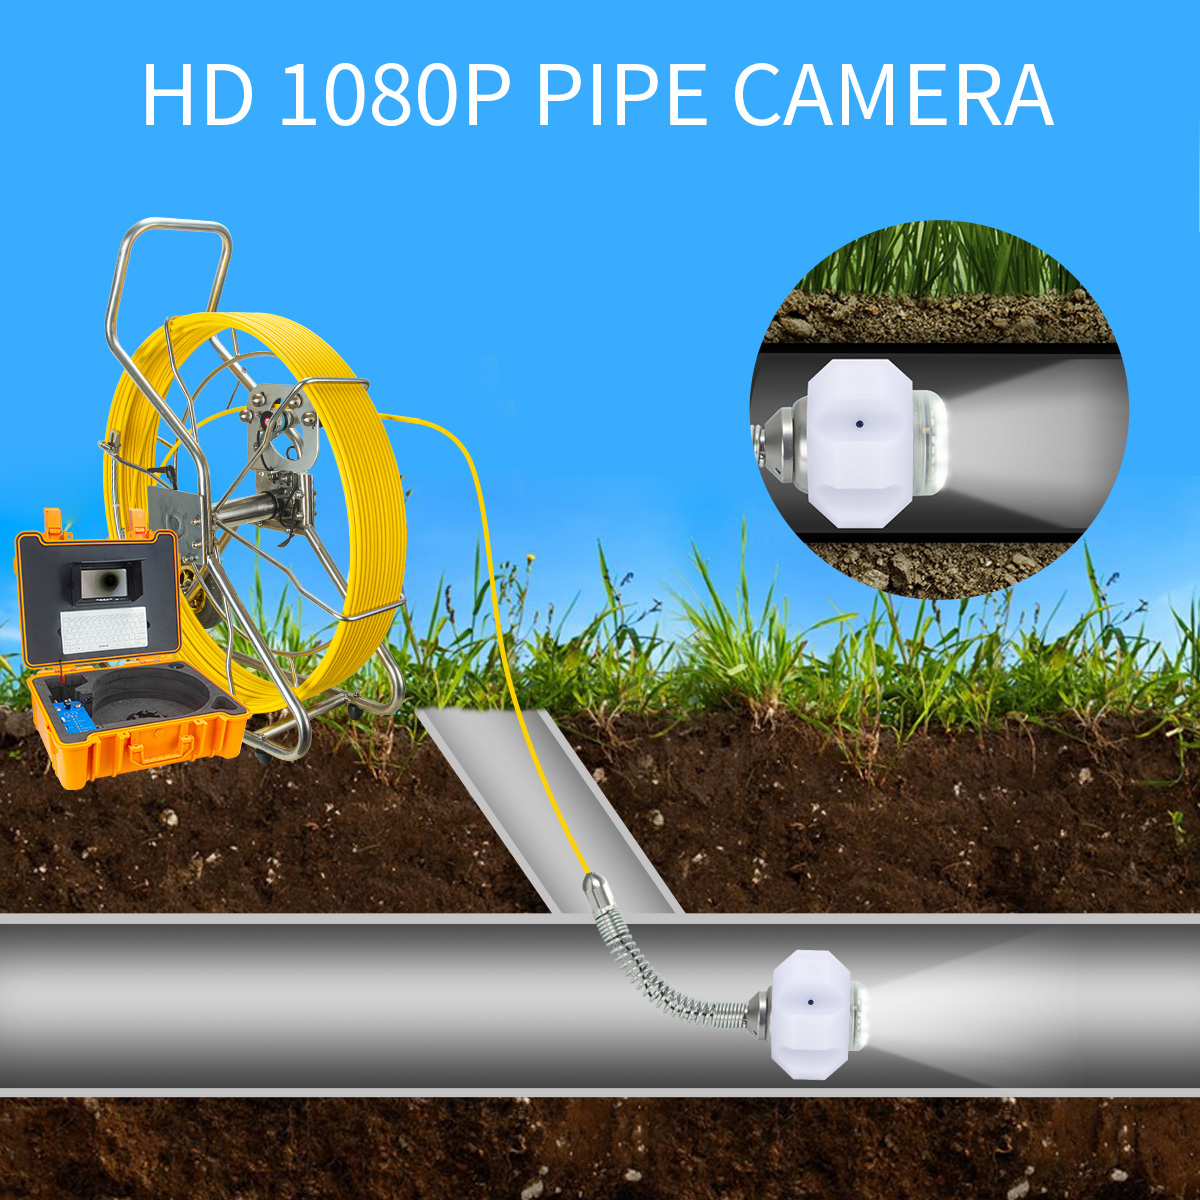 Pipe-and-sewer-inspection-camera-p39g-series-tft-9-hd